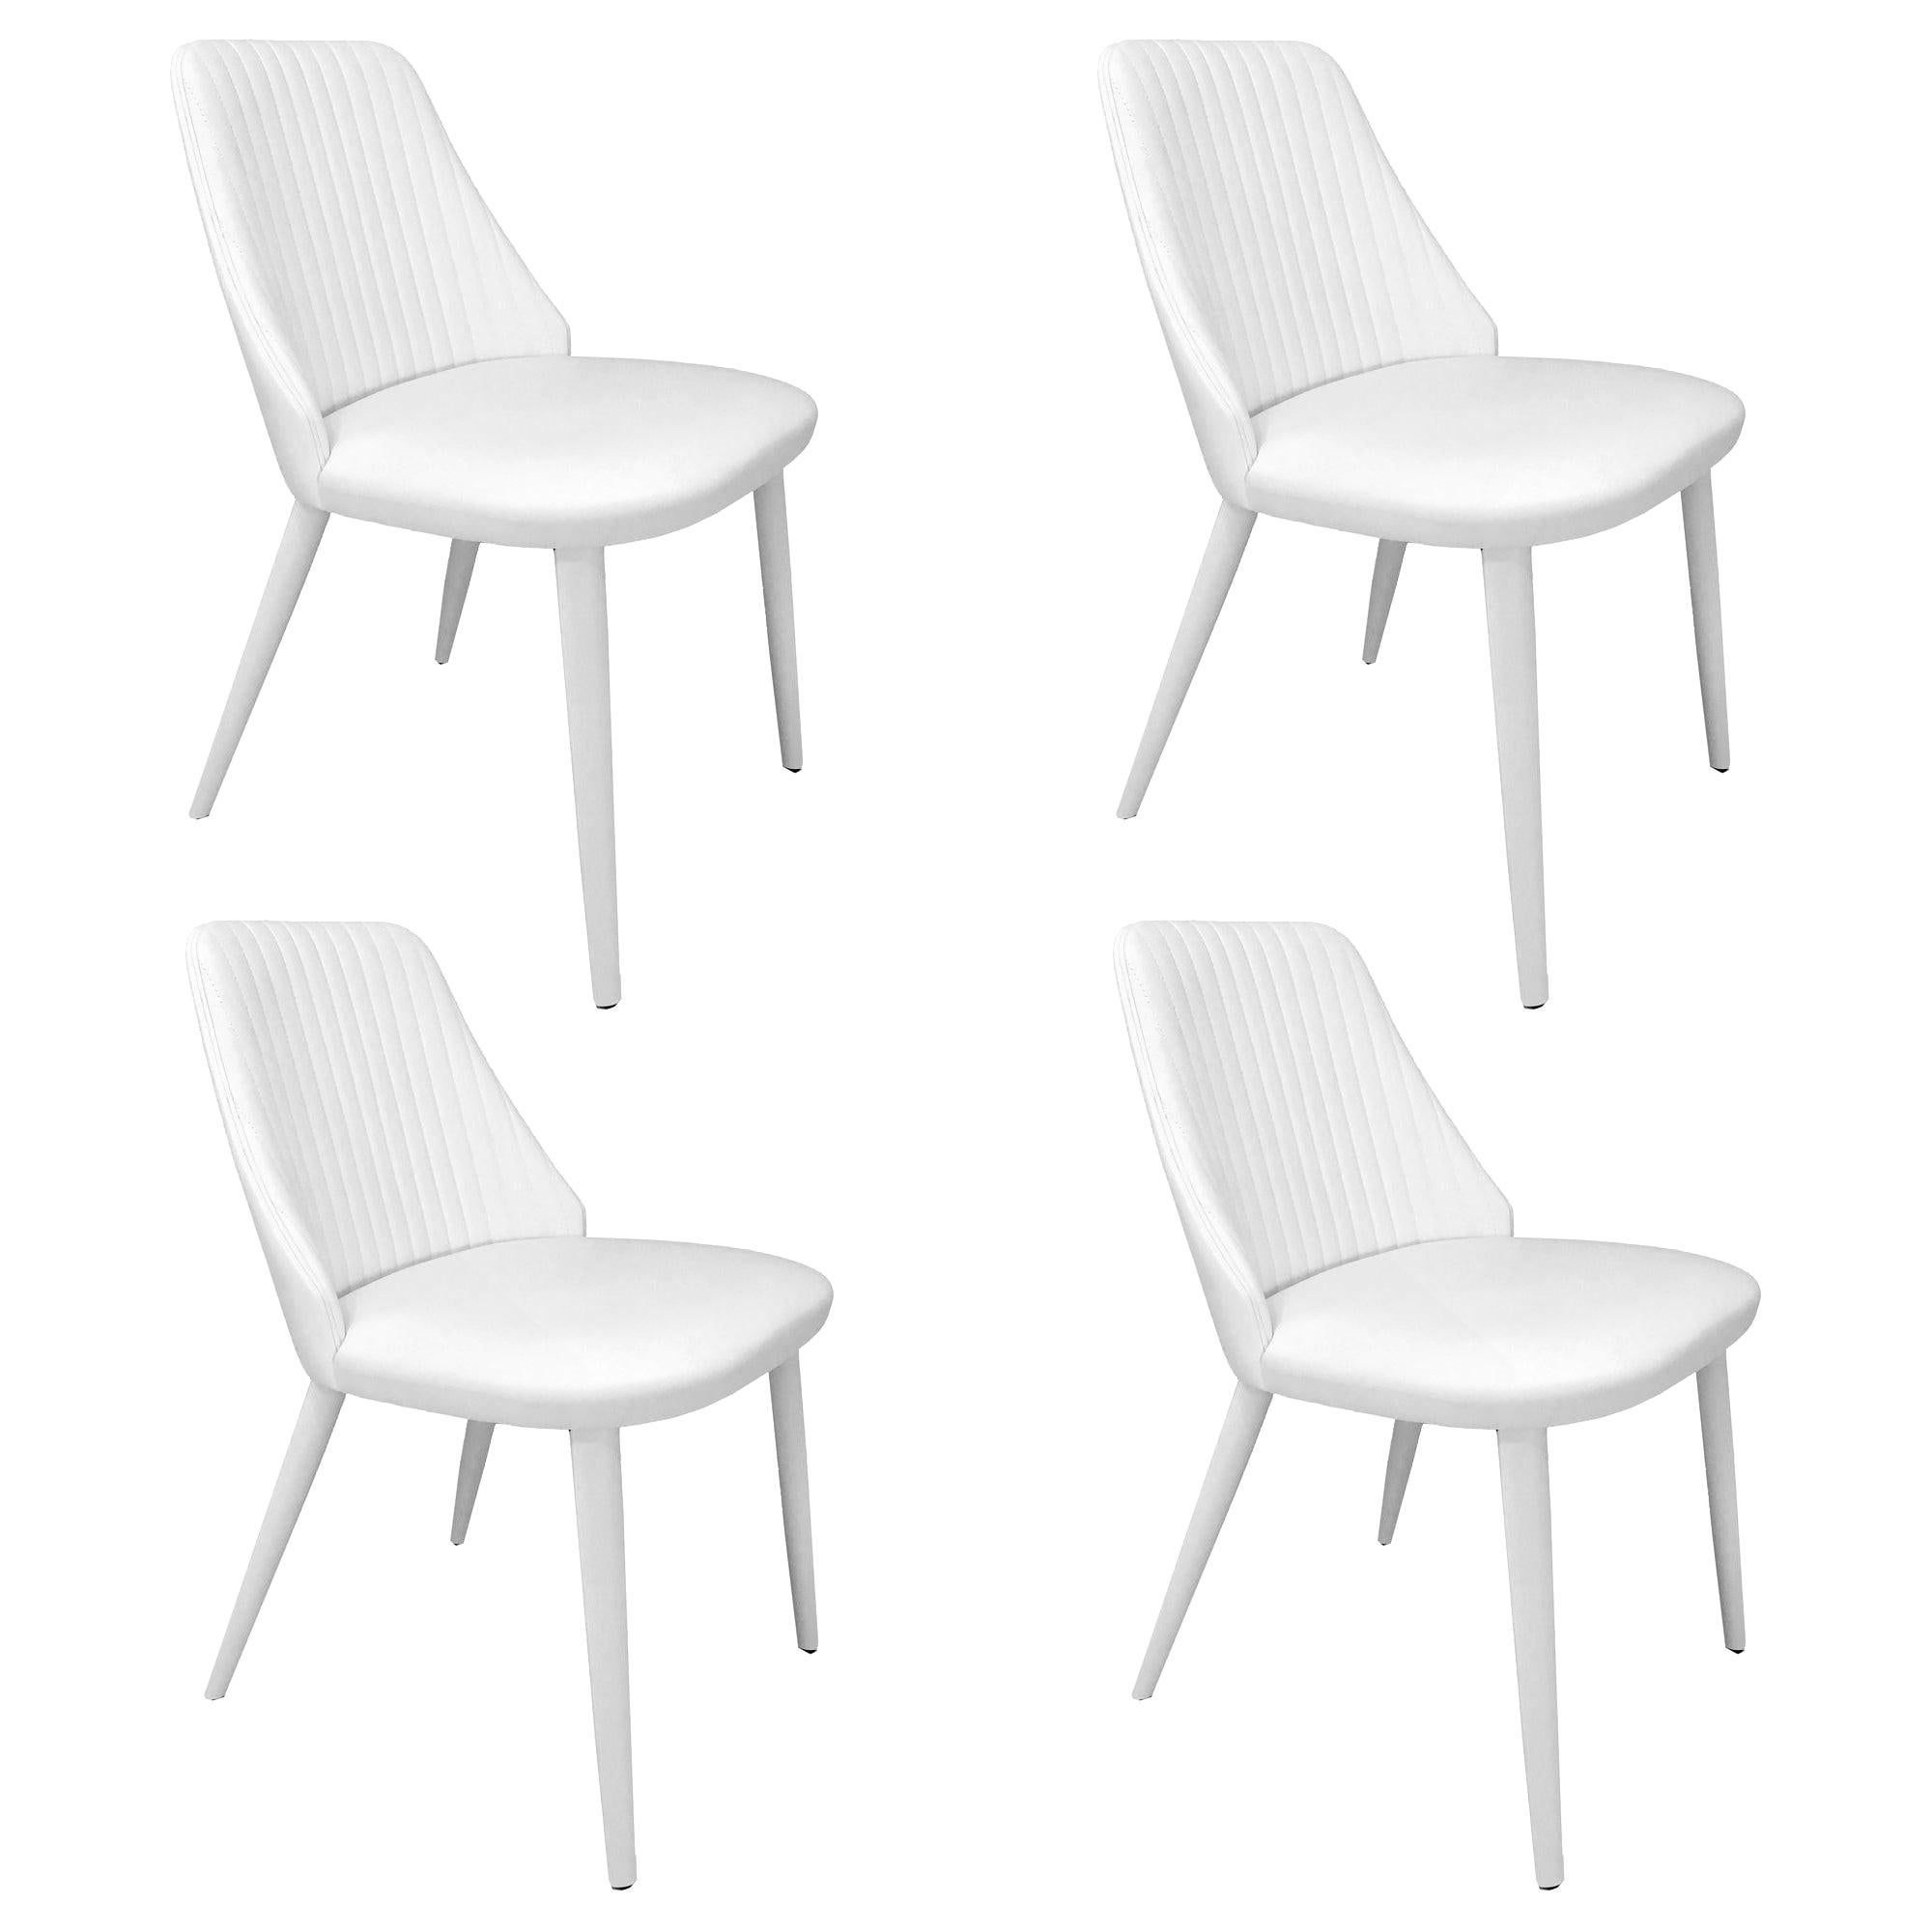 In Stock in Los Angeles, Set of 4 White Leather Dining Chairs by Enzo Berti